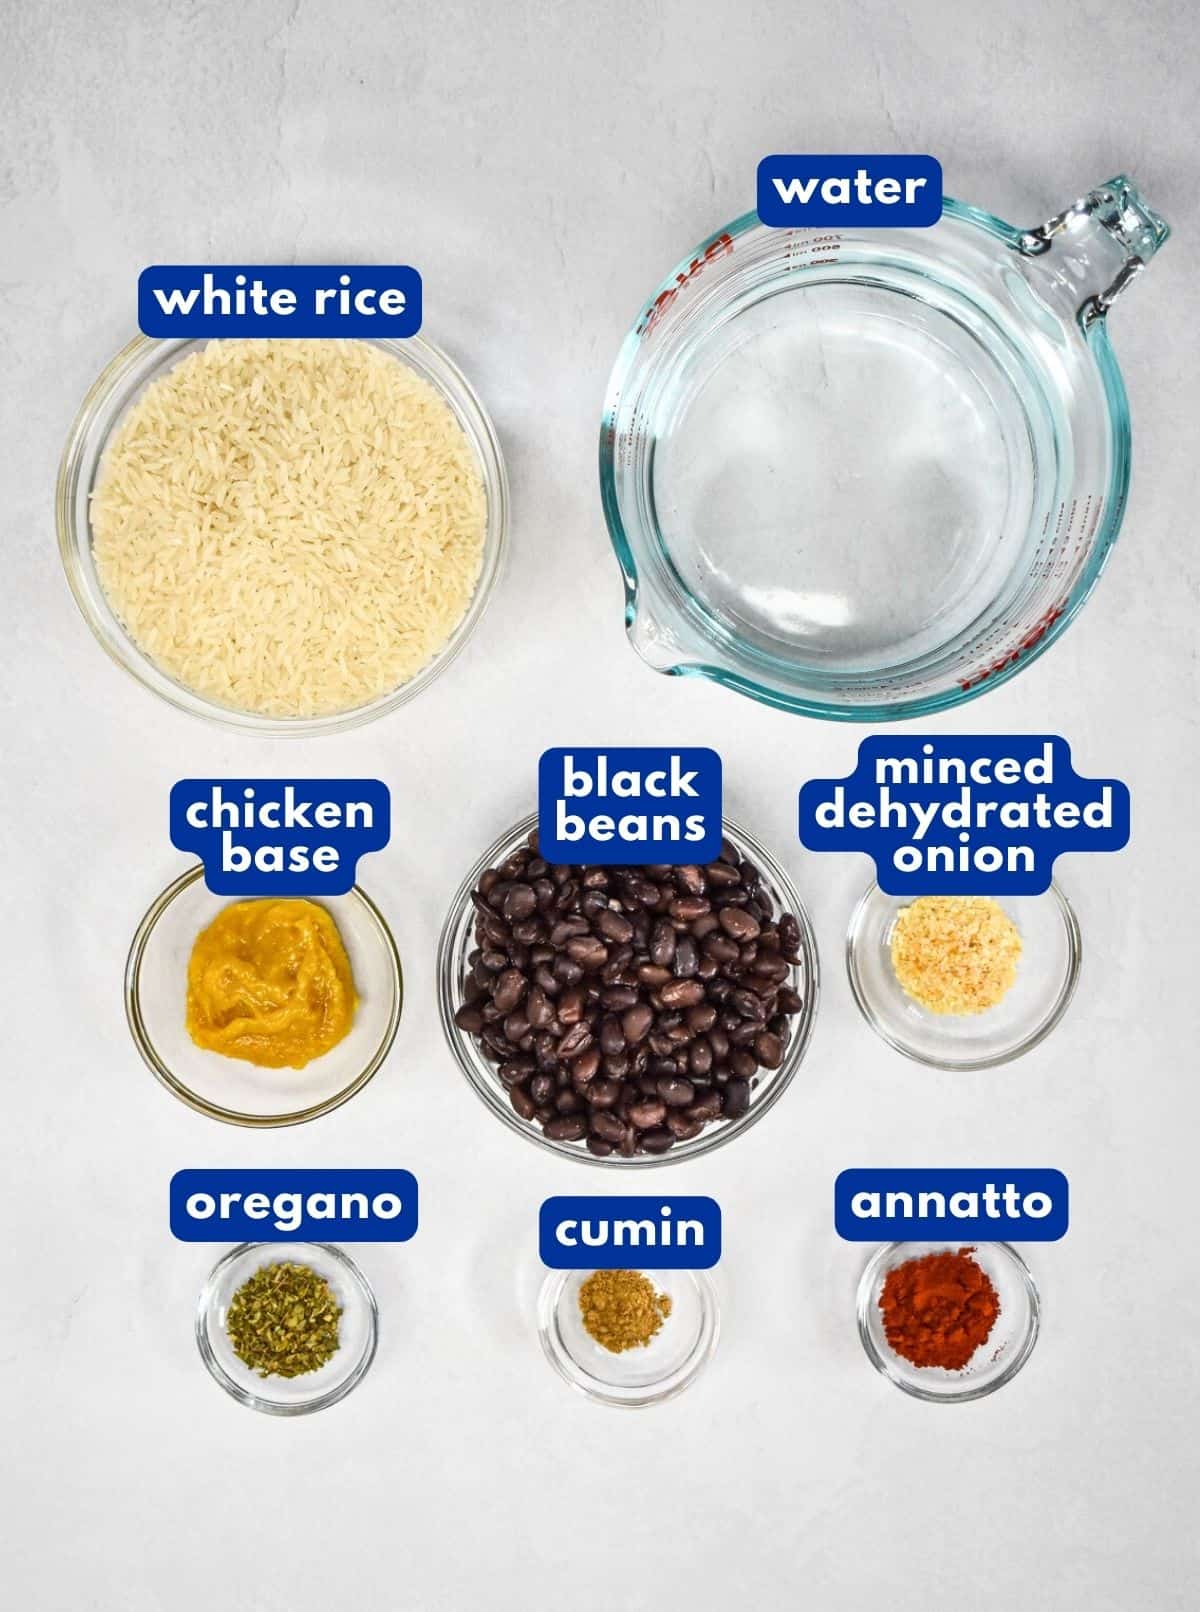 The ingredients for the rice dish prepped and arranged in glass bowls on a white table with each labeled with blue and white letters.